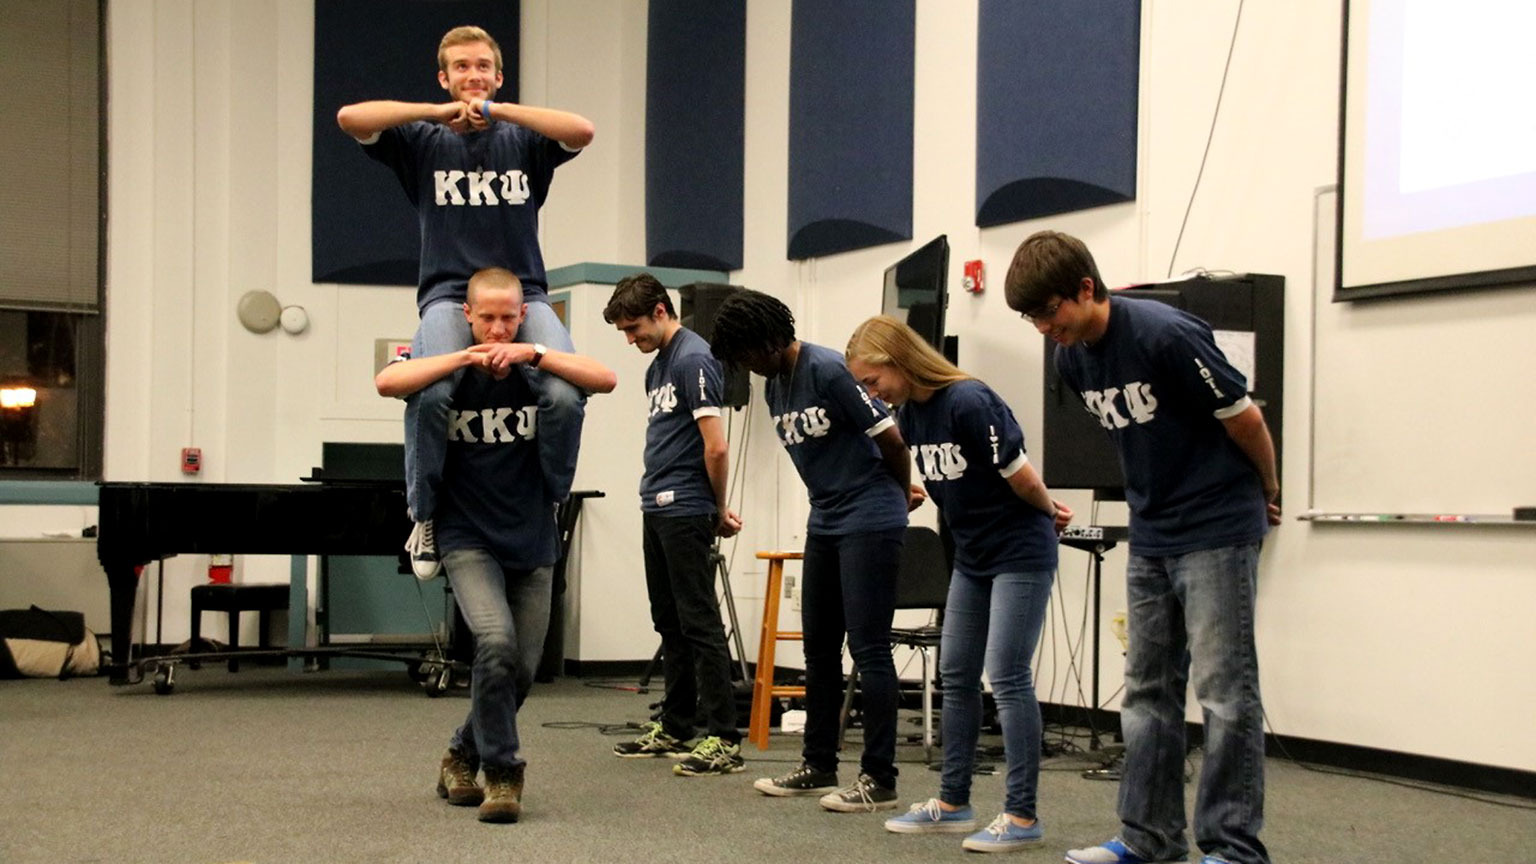 A member of the Kappa Kappa Psi marching band fraternity rides on a fraternity brother's shoulders while four other fraternity members line up and bow as the first two walk by. All people in this photo are wearing shirts with Greek letters for Kappa Kappa Psi on them.